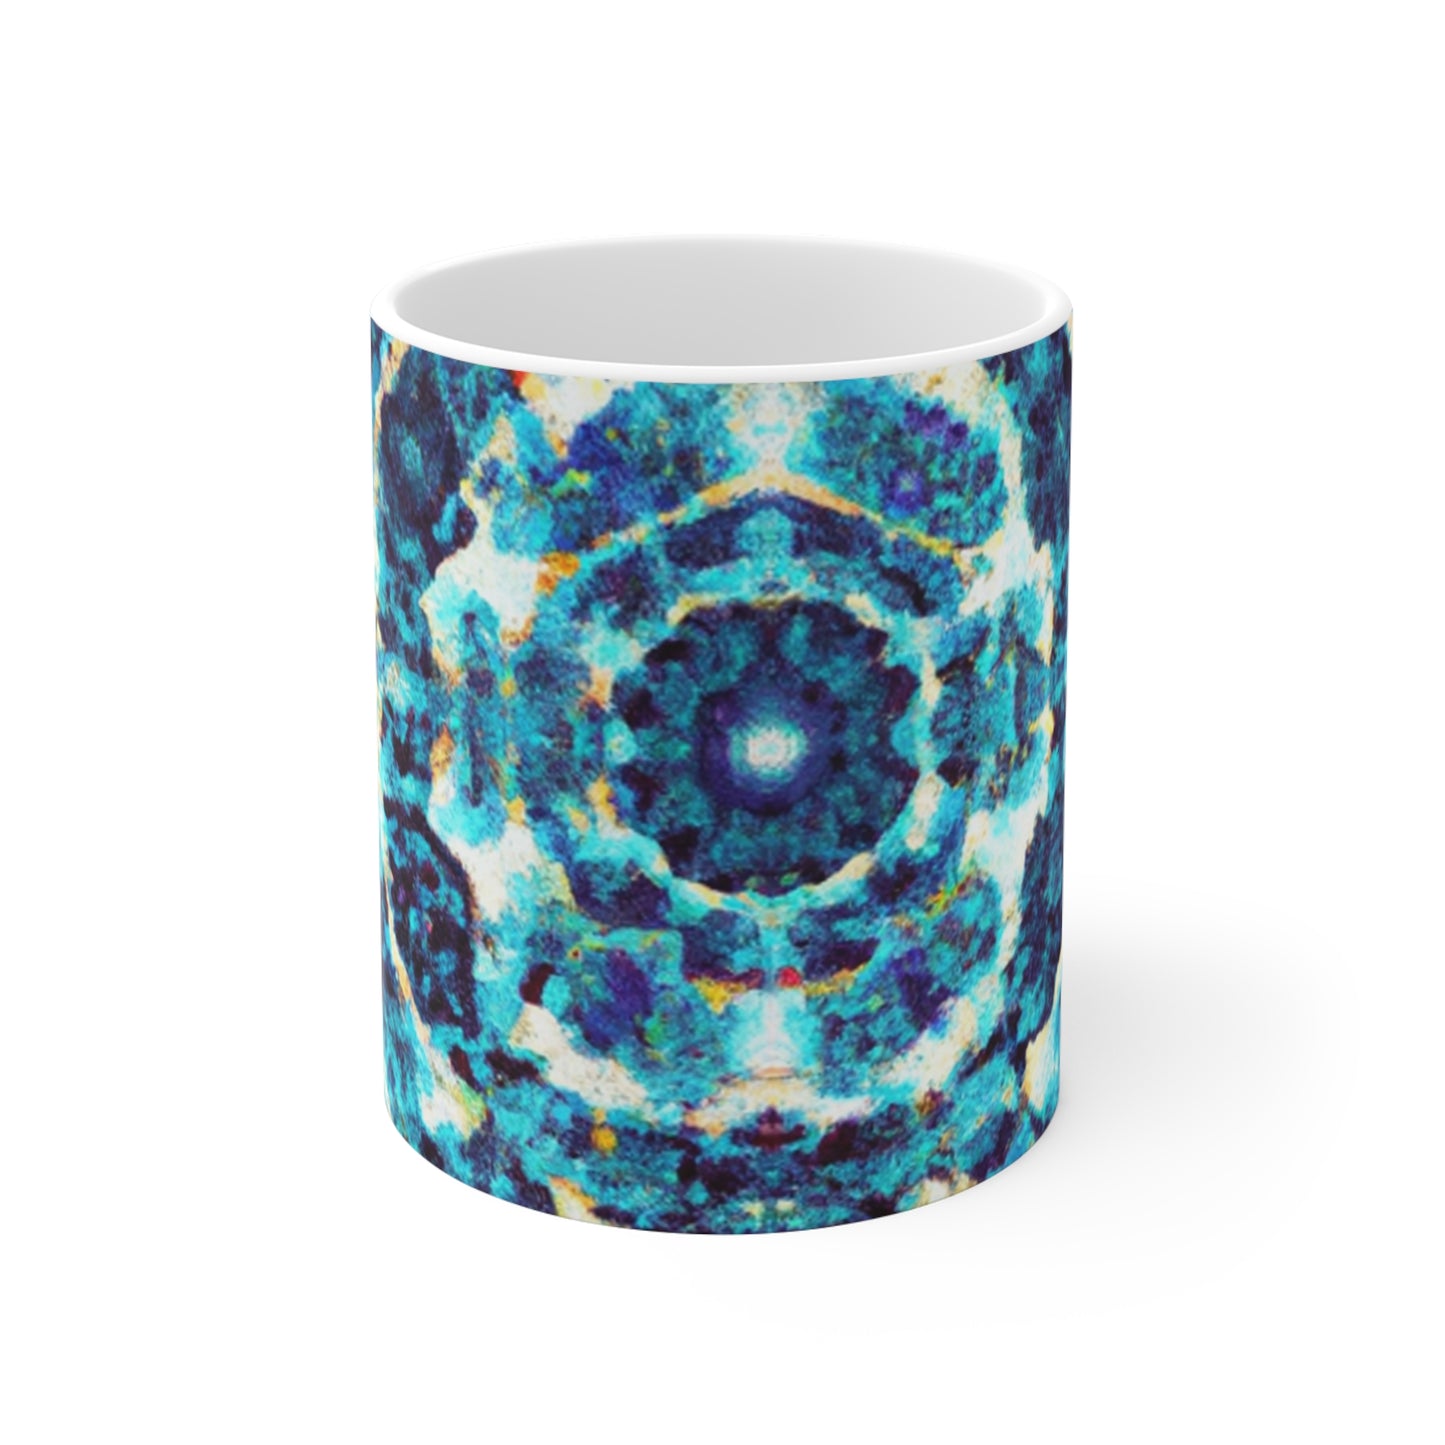 Gustavo's Gourmet - Psychedelic Coffee Cup Mug 11 Ounce